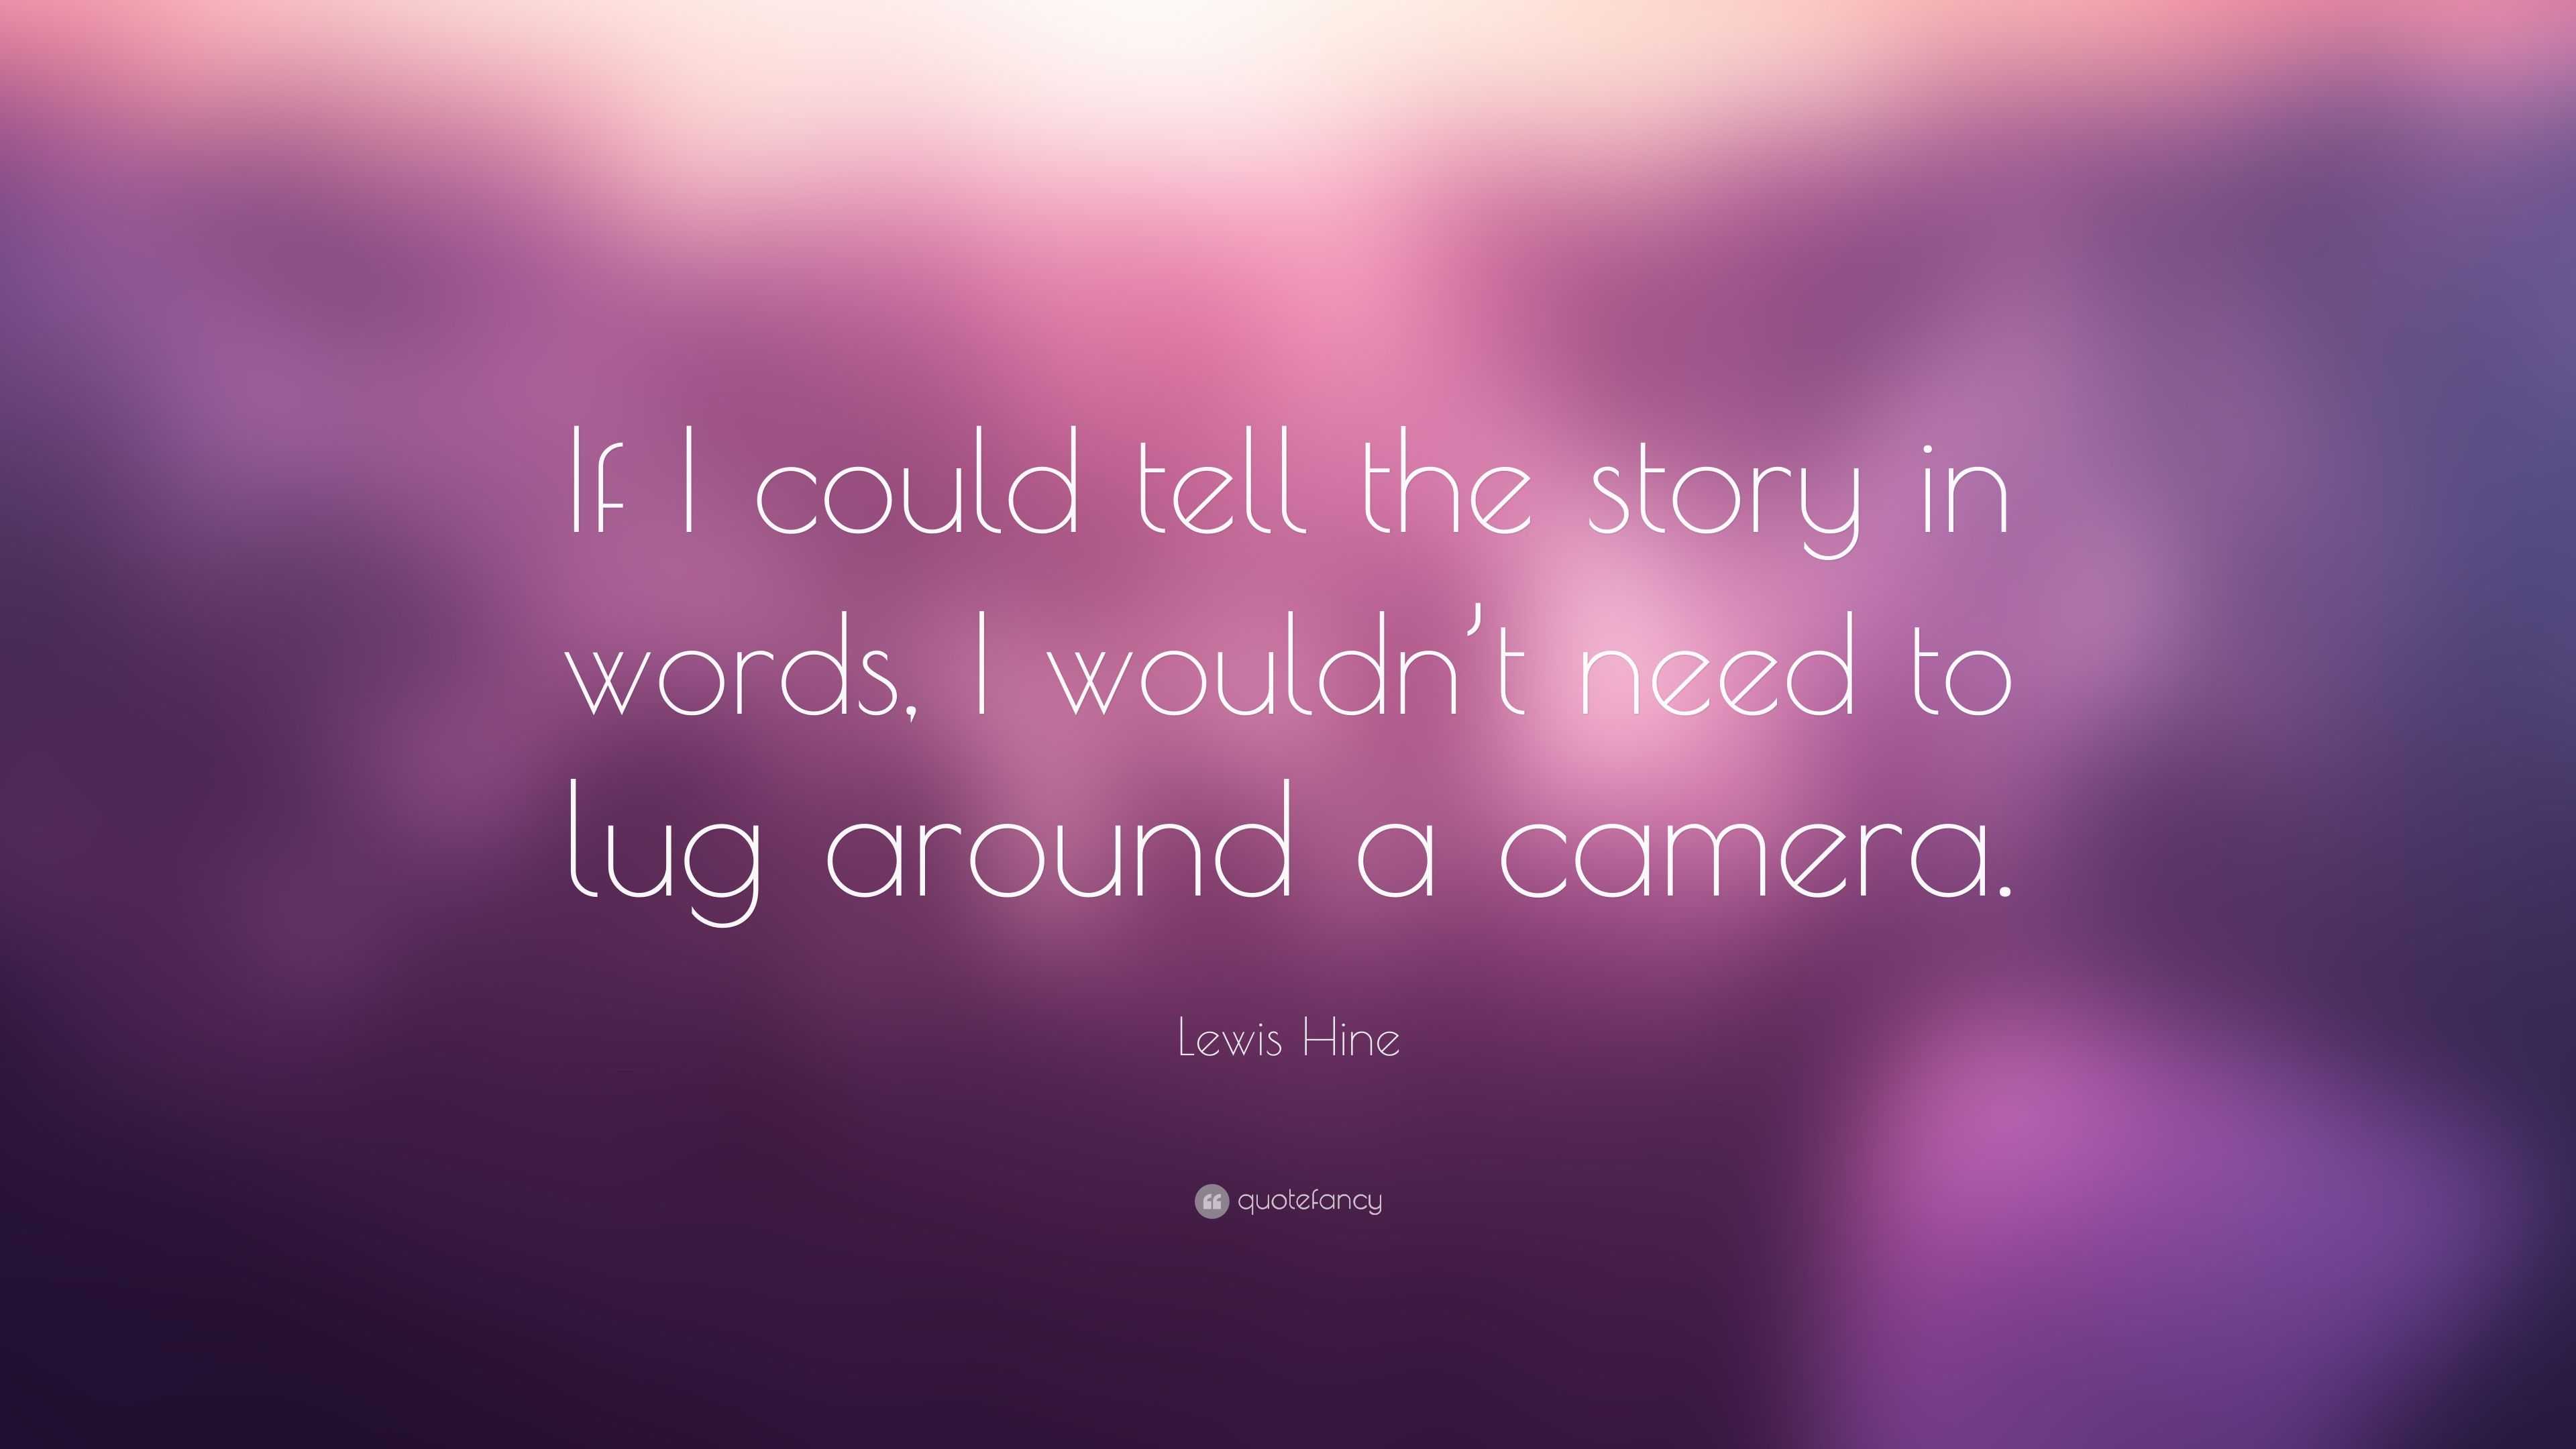 Lewis Hine Quote: "If I could tell the story in words, I wouldn't need to lug around a camera ...